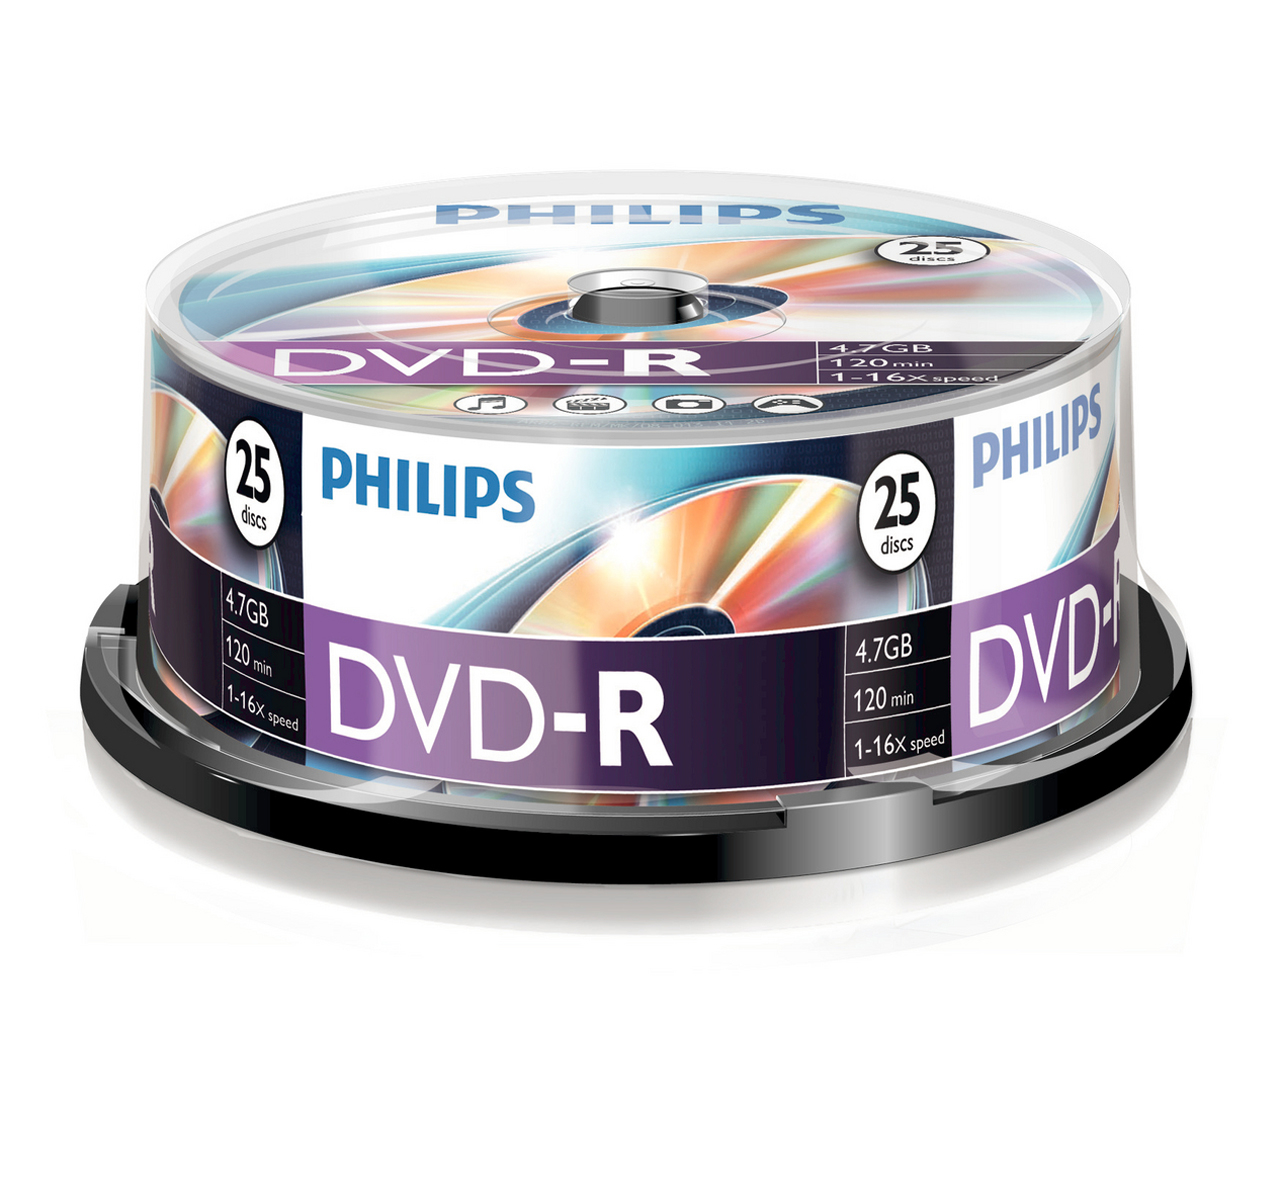 PHILIPS DVD-R Spindle 4.7GB 5749 16x 25 Pcs